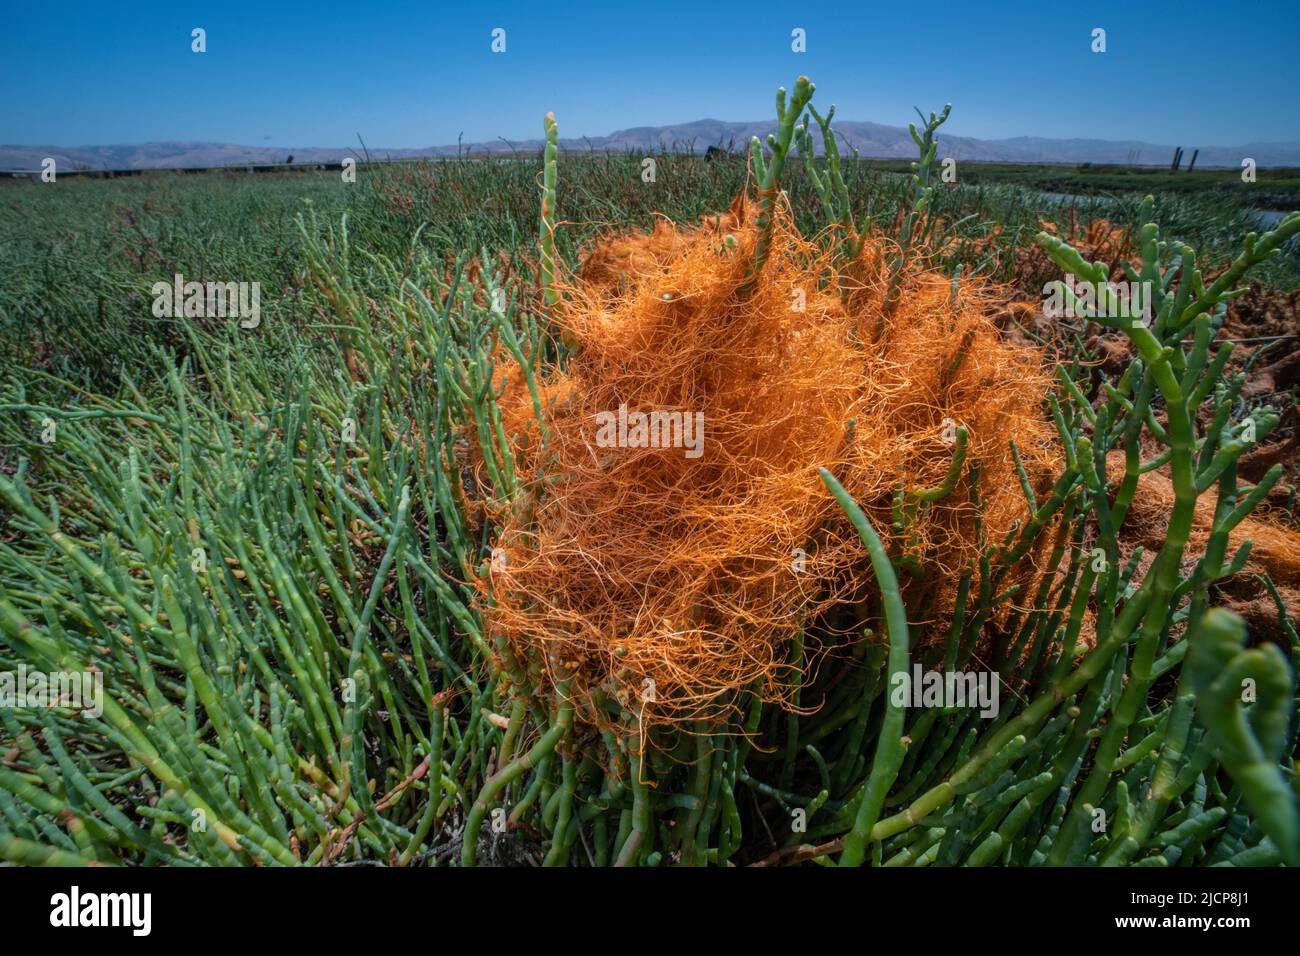 Goldenthread or pacific dodder (Cuscuta pacifica) is a parasitic plant growing on pickleweed (Salicornia) on the Pacific coast of California, USA. Stock Photo